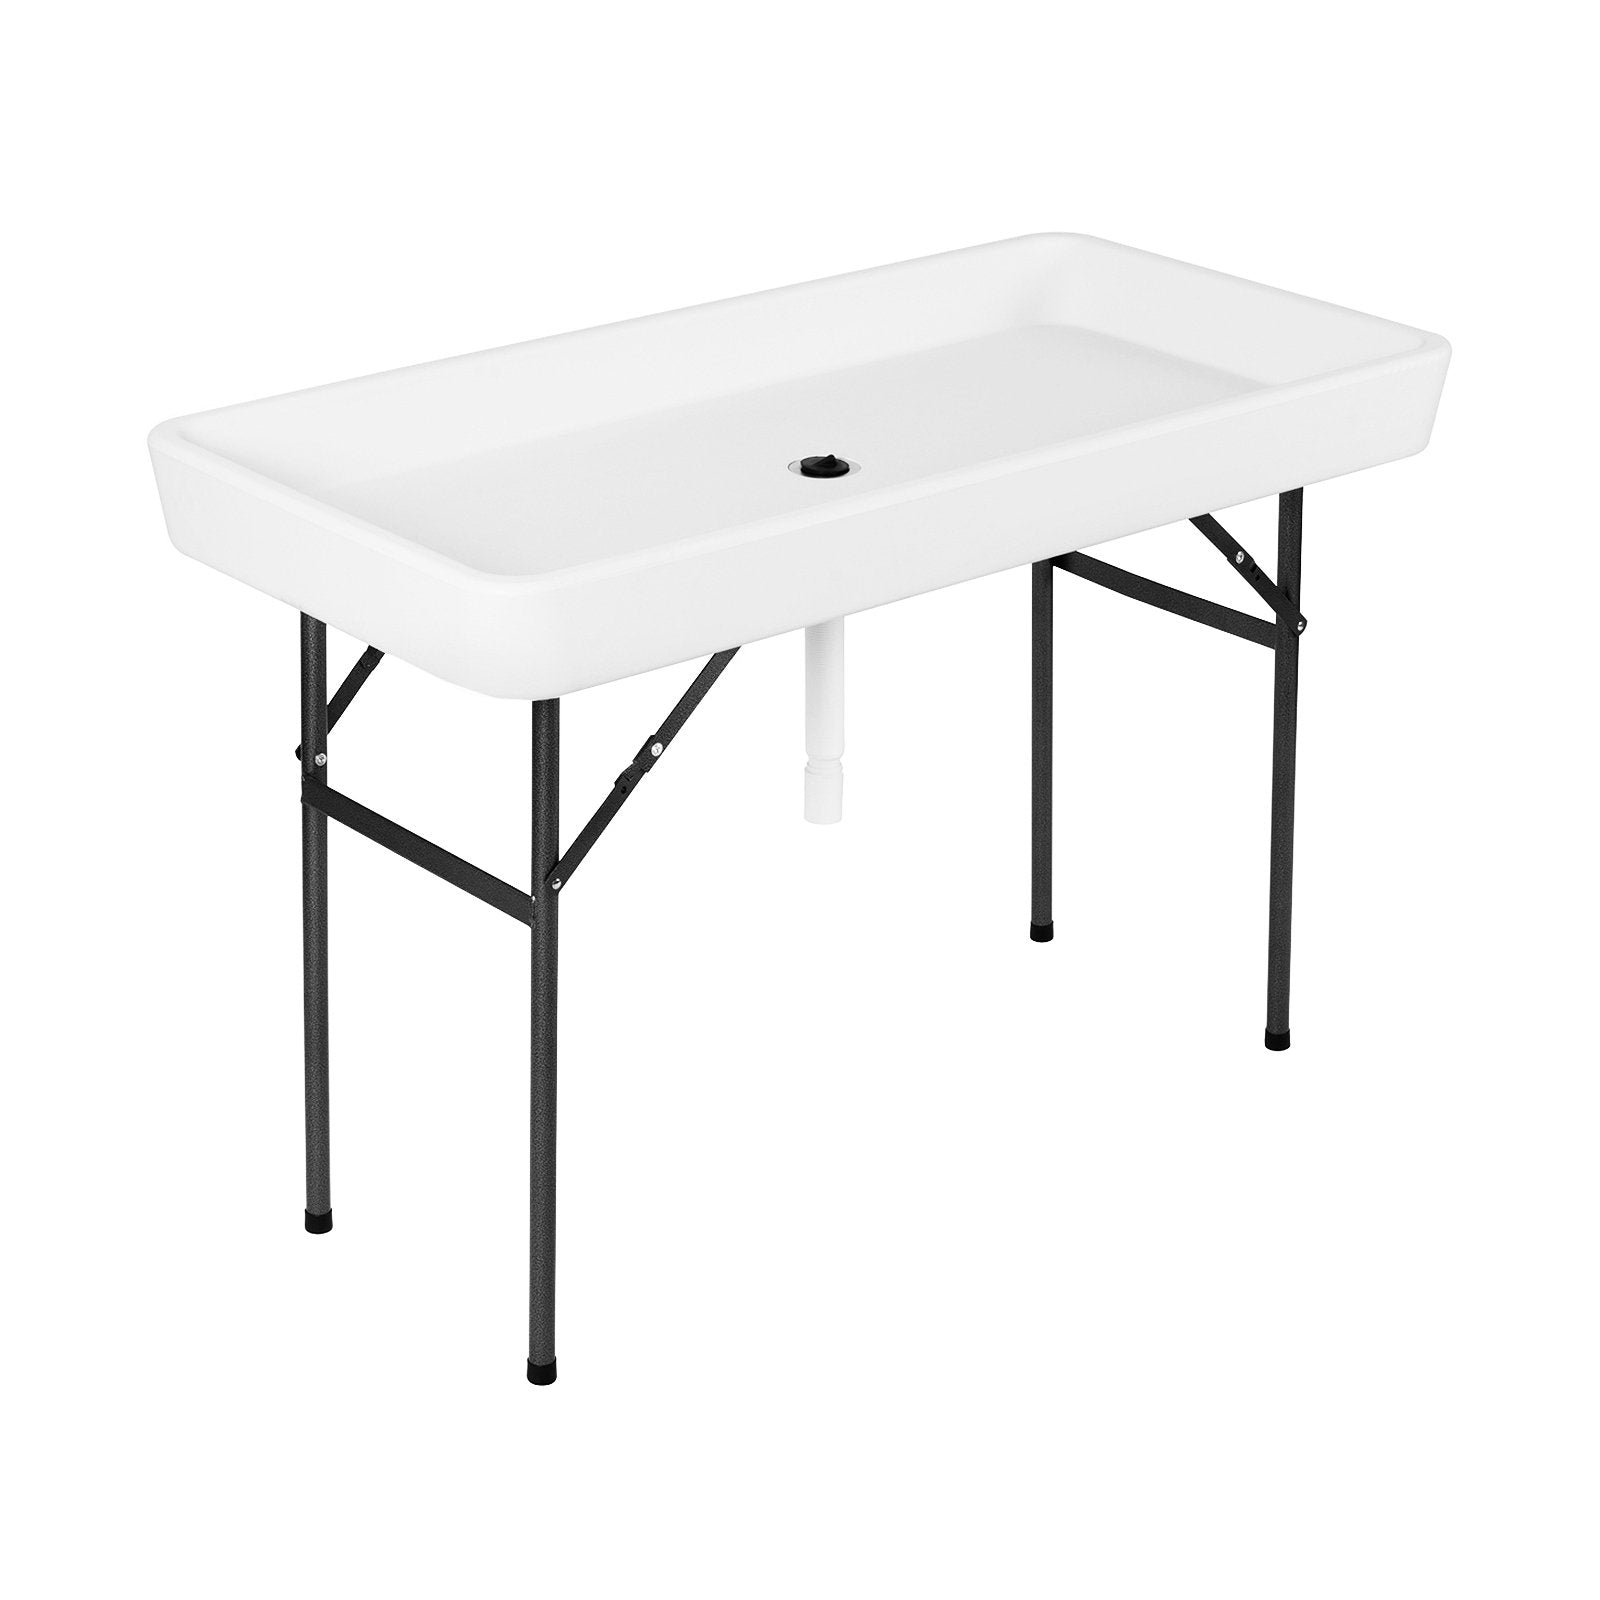 4 Feet Plastic Party Ice Folding Table with Matching Skirt, White - Gallery Canada